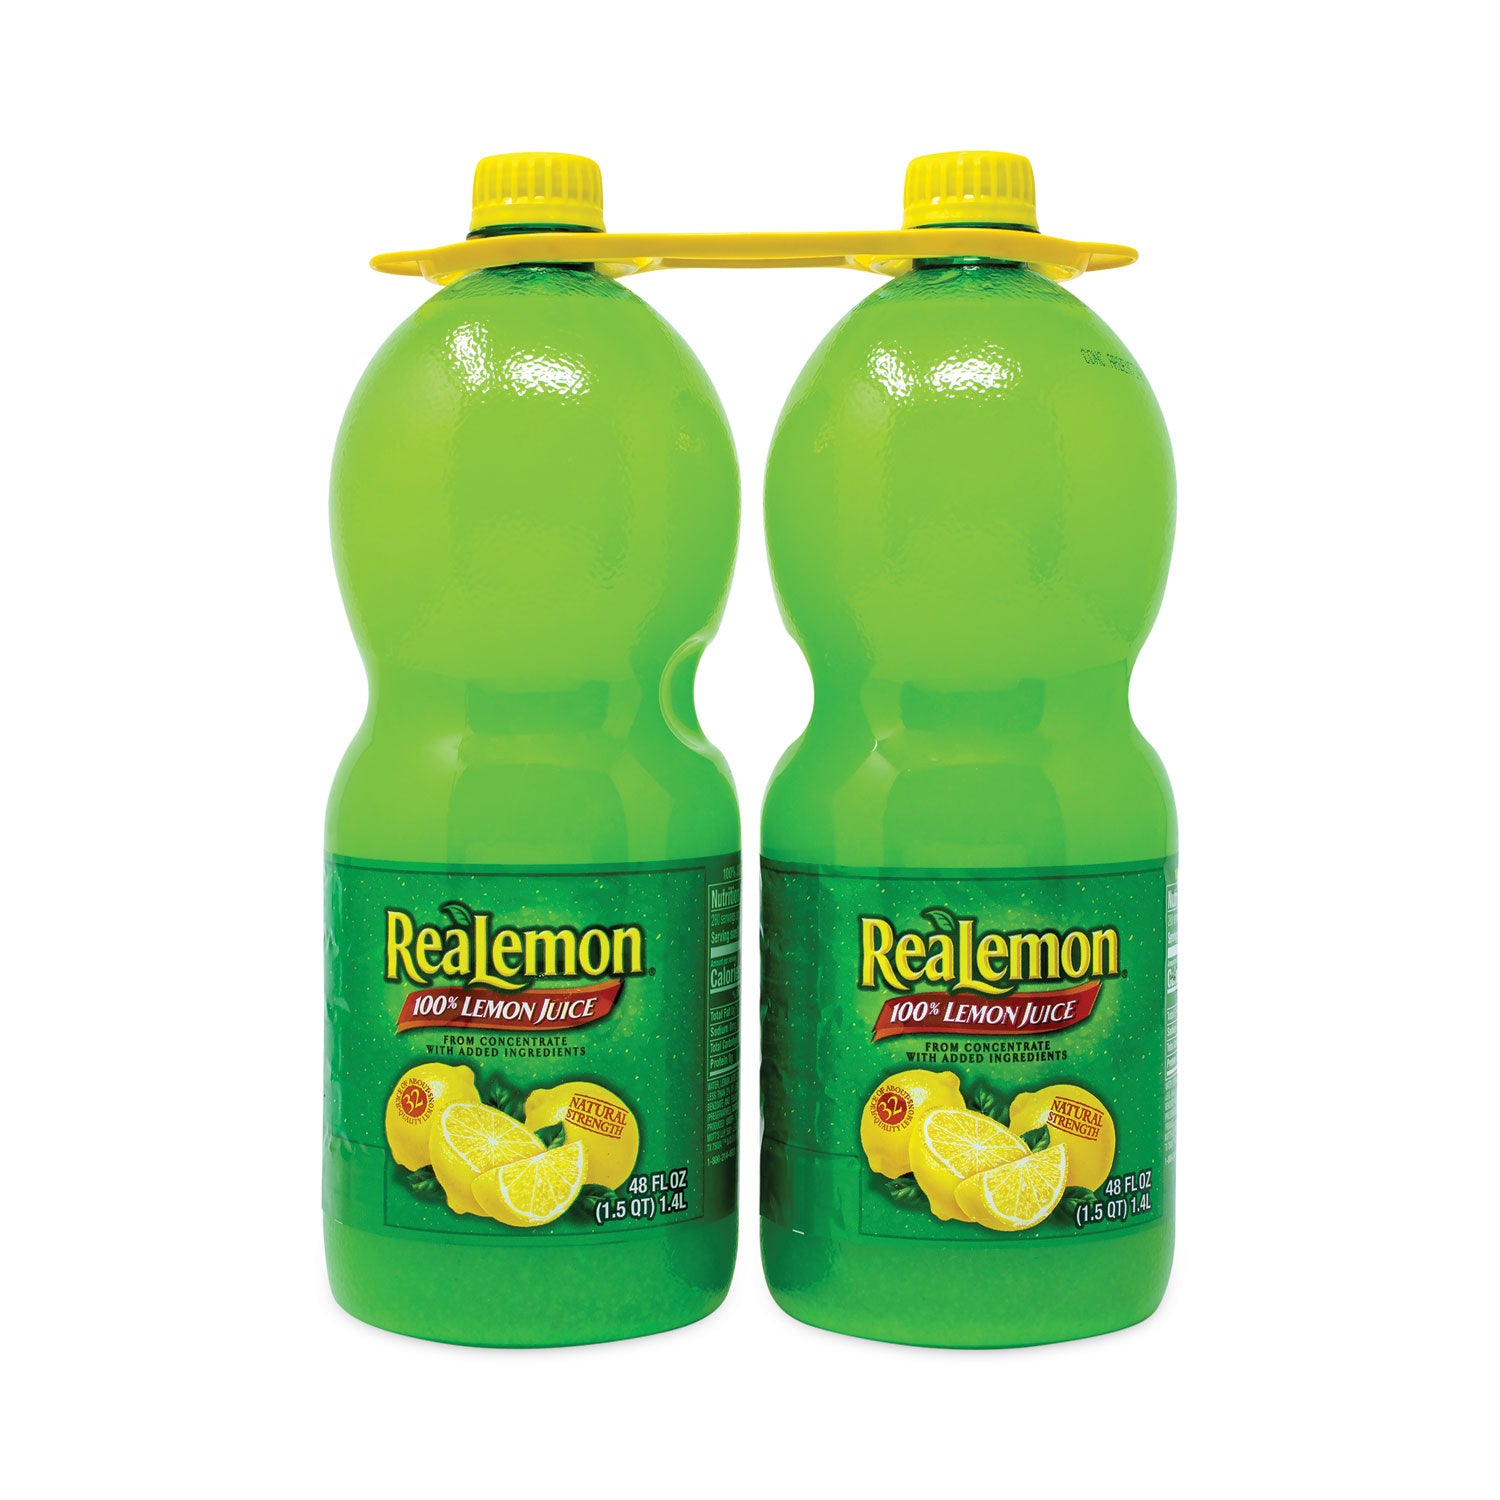 100%-lemon-juice-from-concentrate-48-oz-bottle-2-carton-ships-in-1-3-business-days_grr22000913 - 1